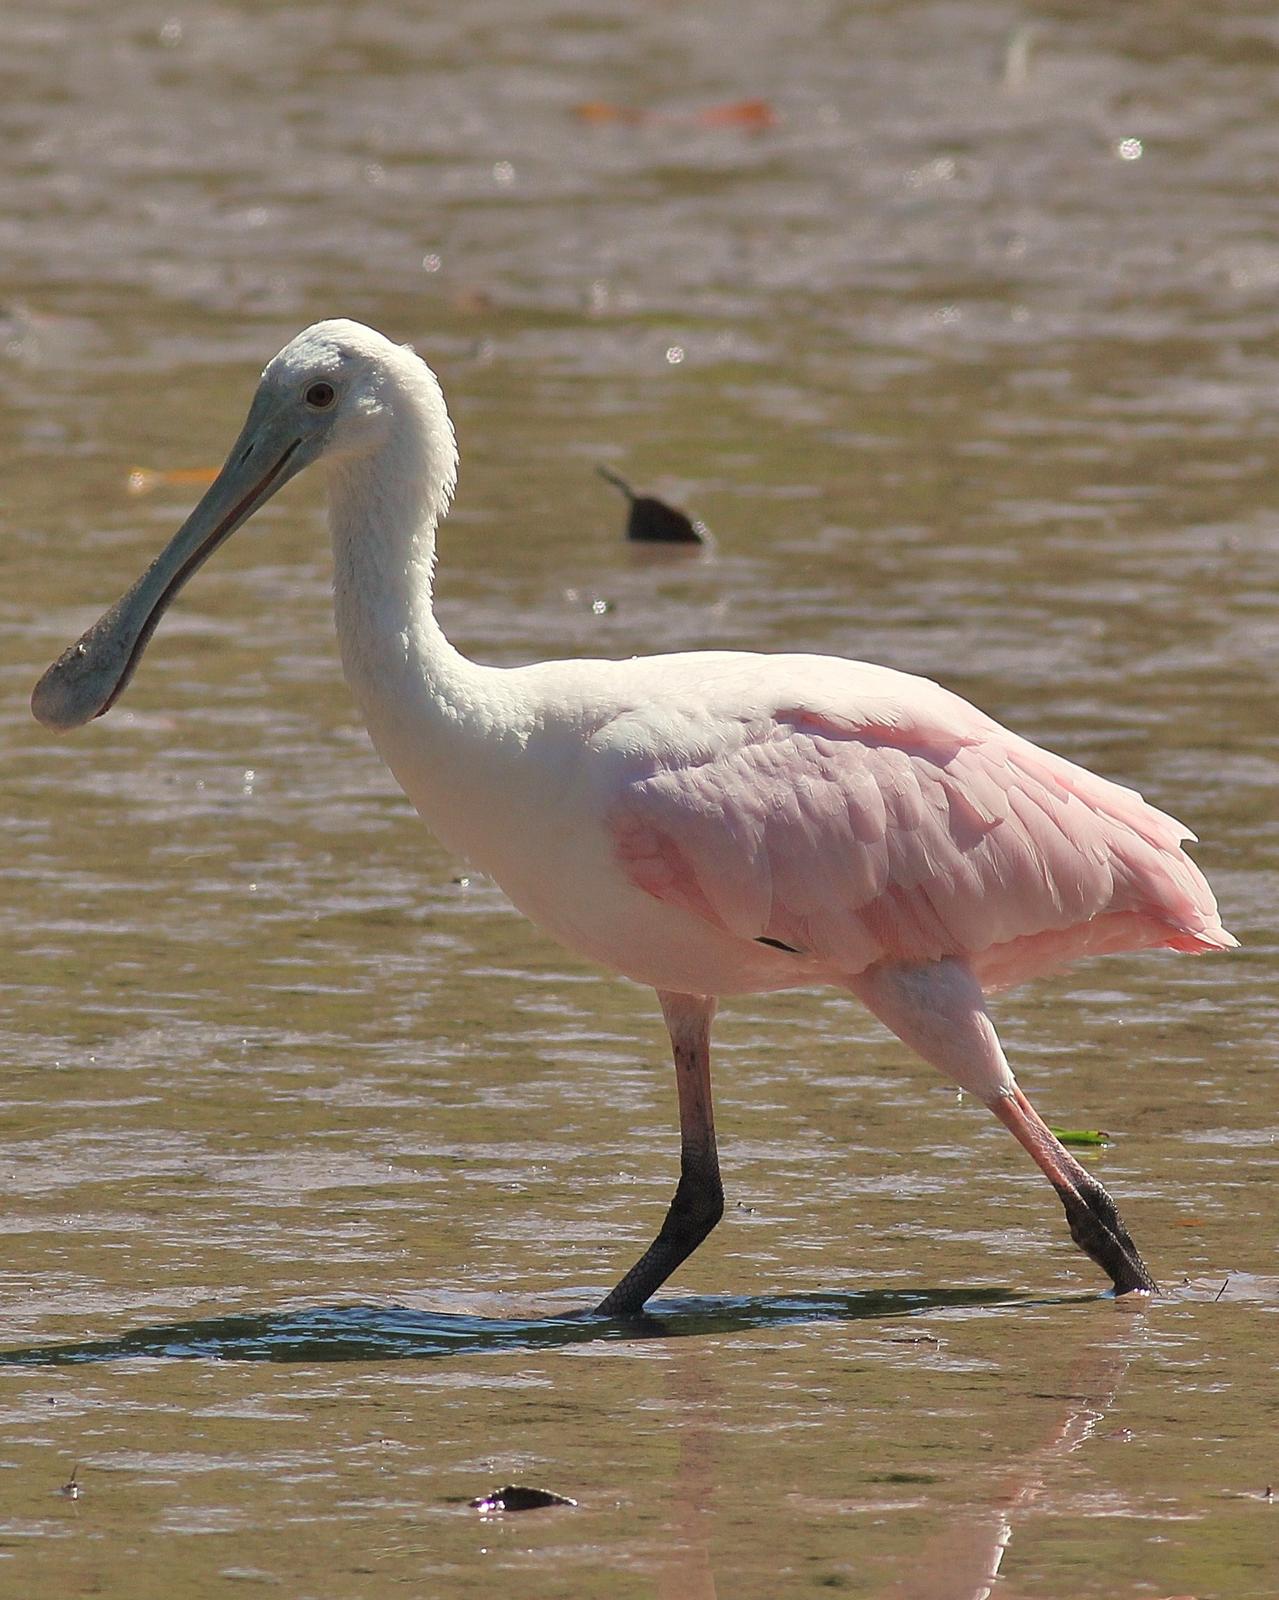 Roseate Spoonbill Photo by Alex Lamoreaux